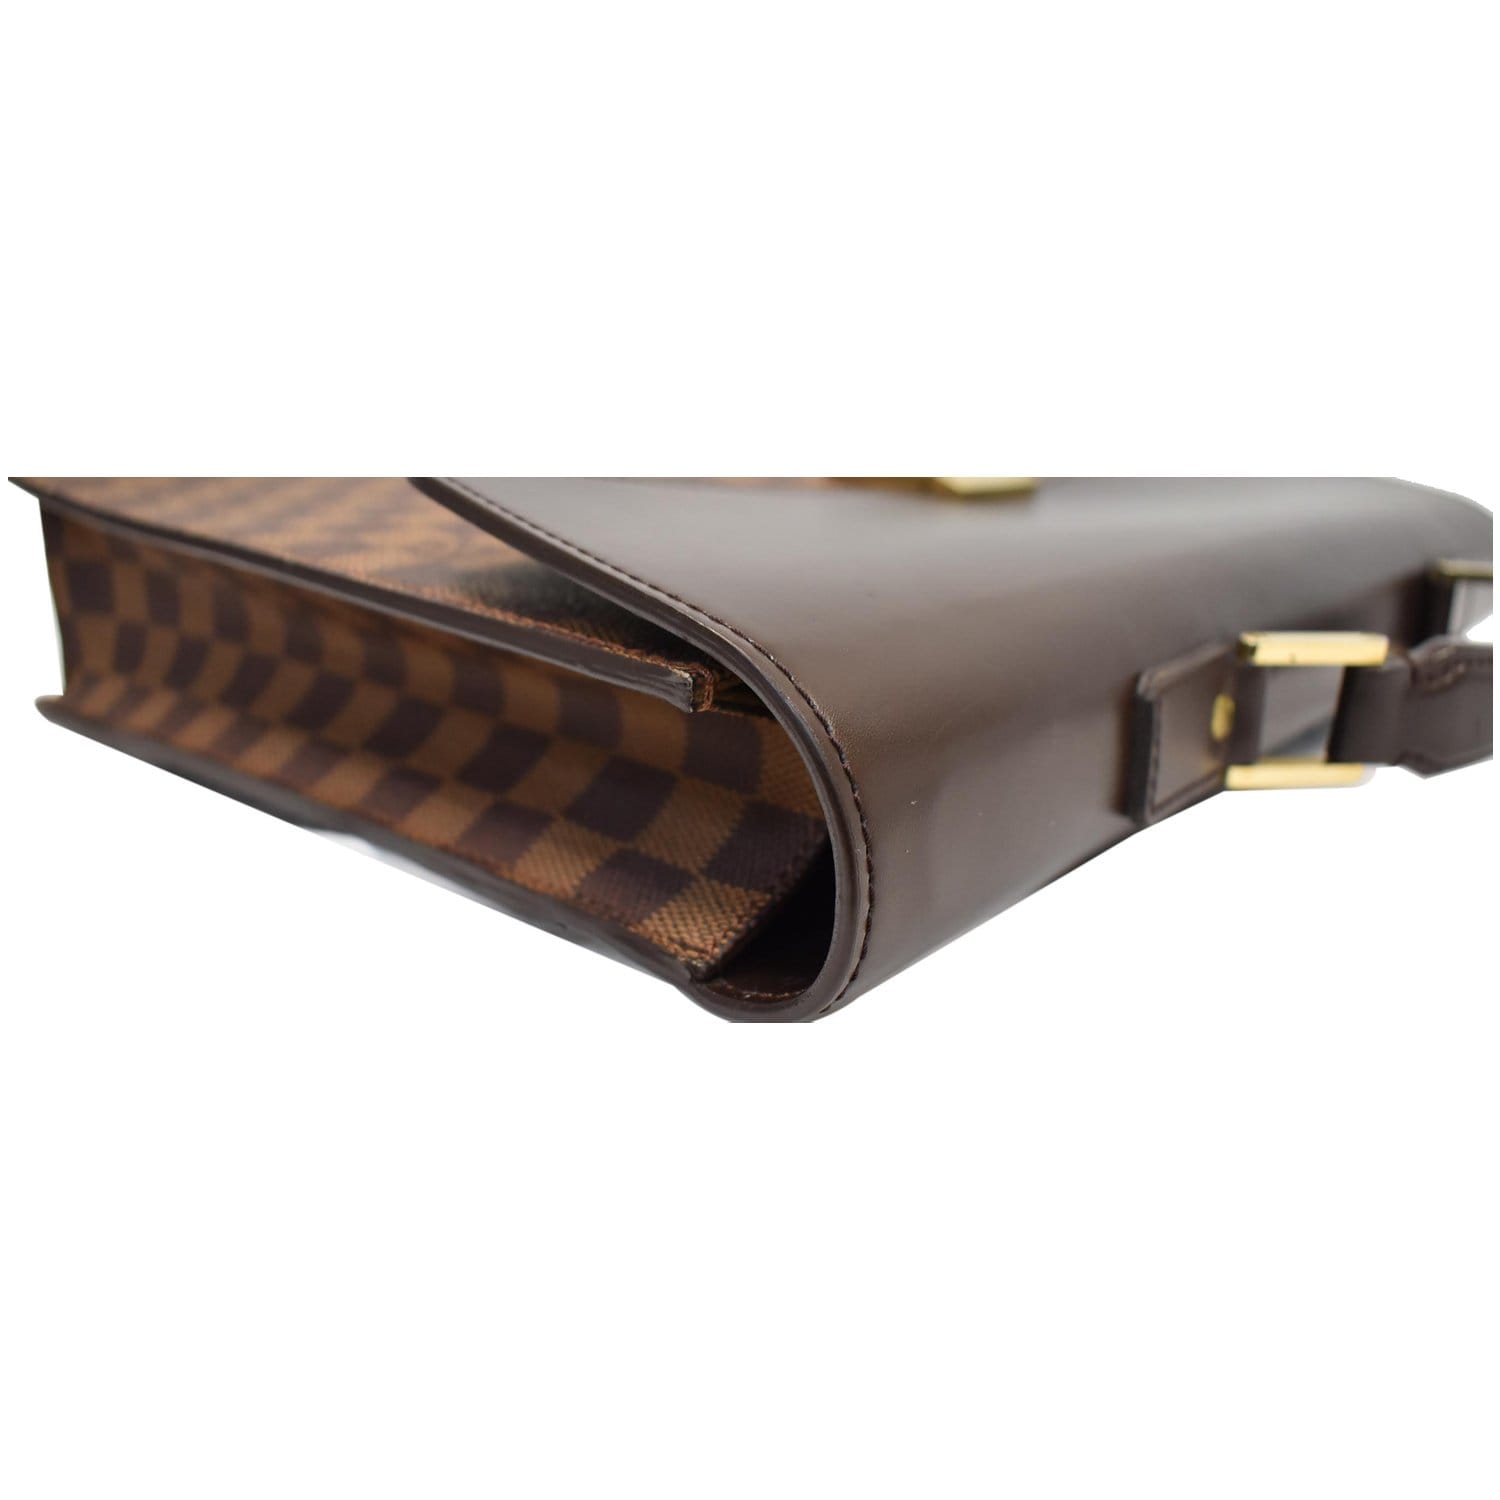 Louis Vuitton Altona Briefcase in brown checkerboard canvas and brown  leather